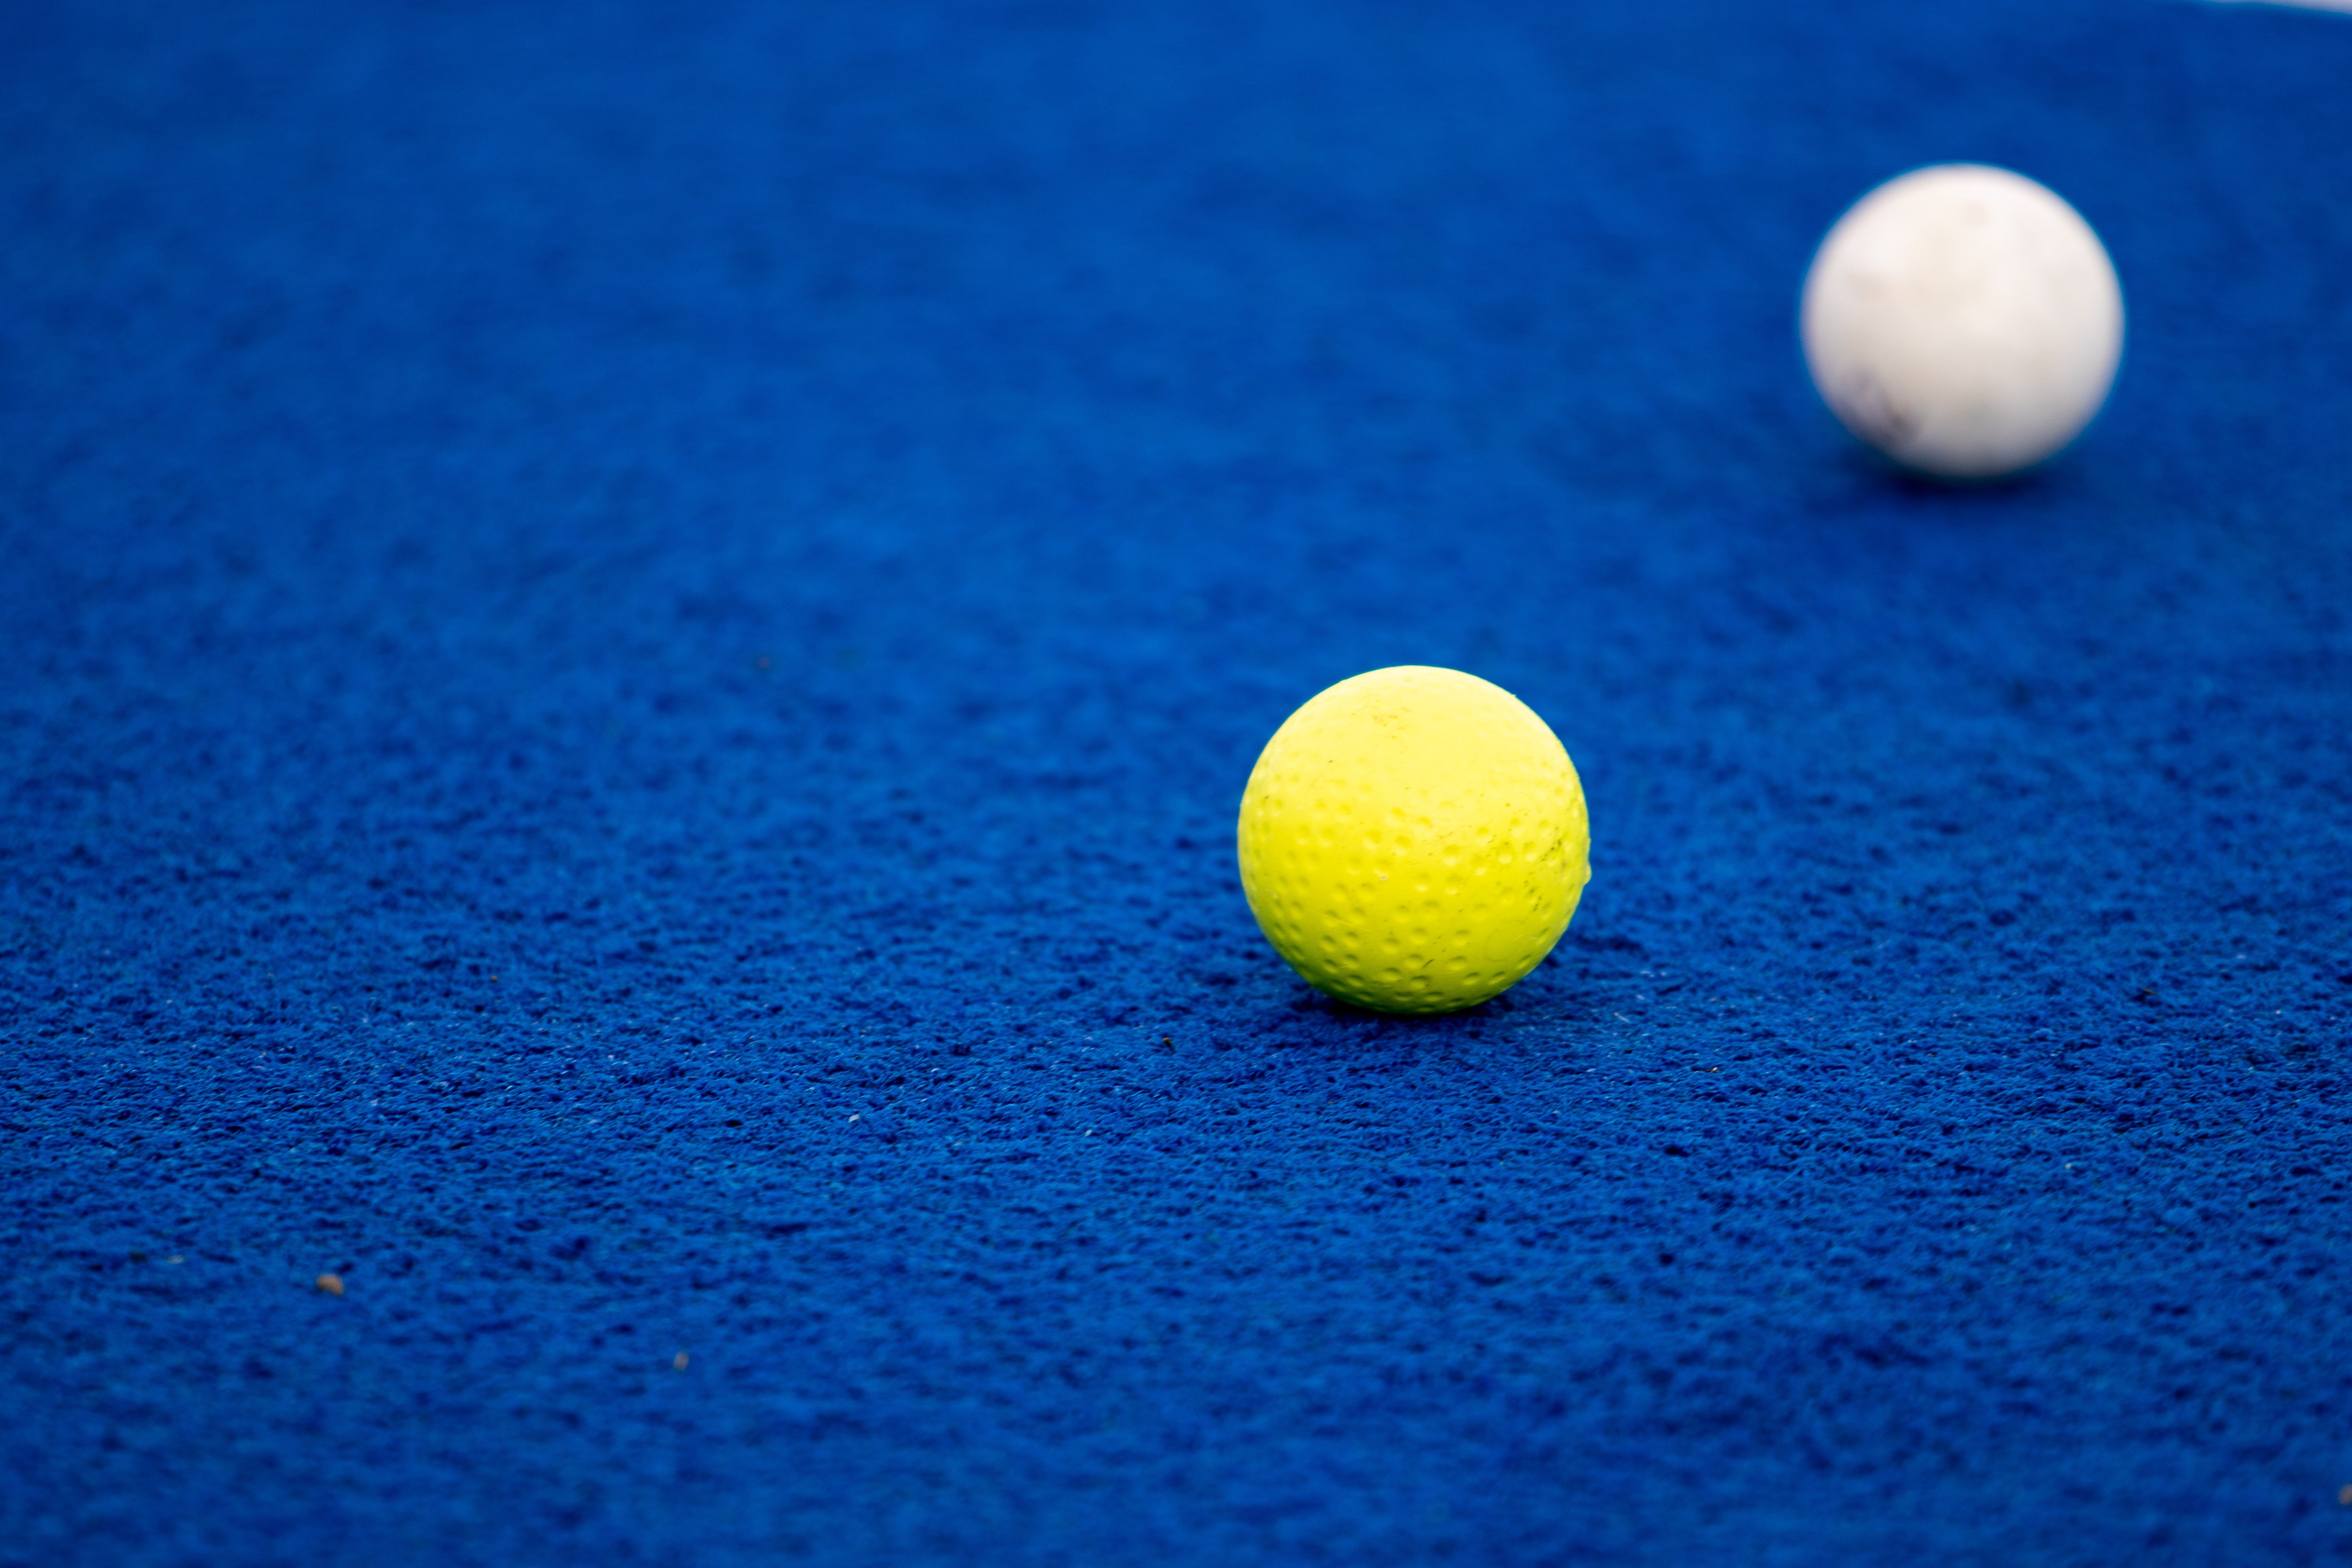 Pictured - An image of yellow and white gold balls on a blue carpet | Source: Pexels 